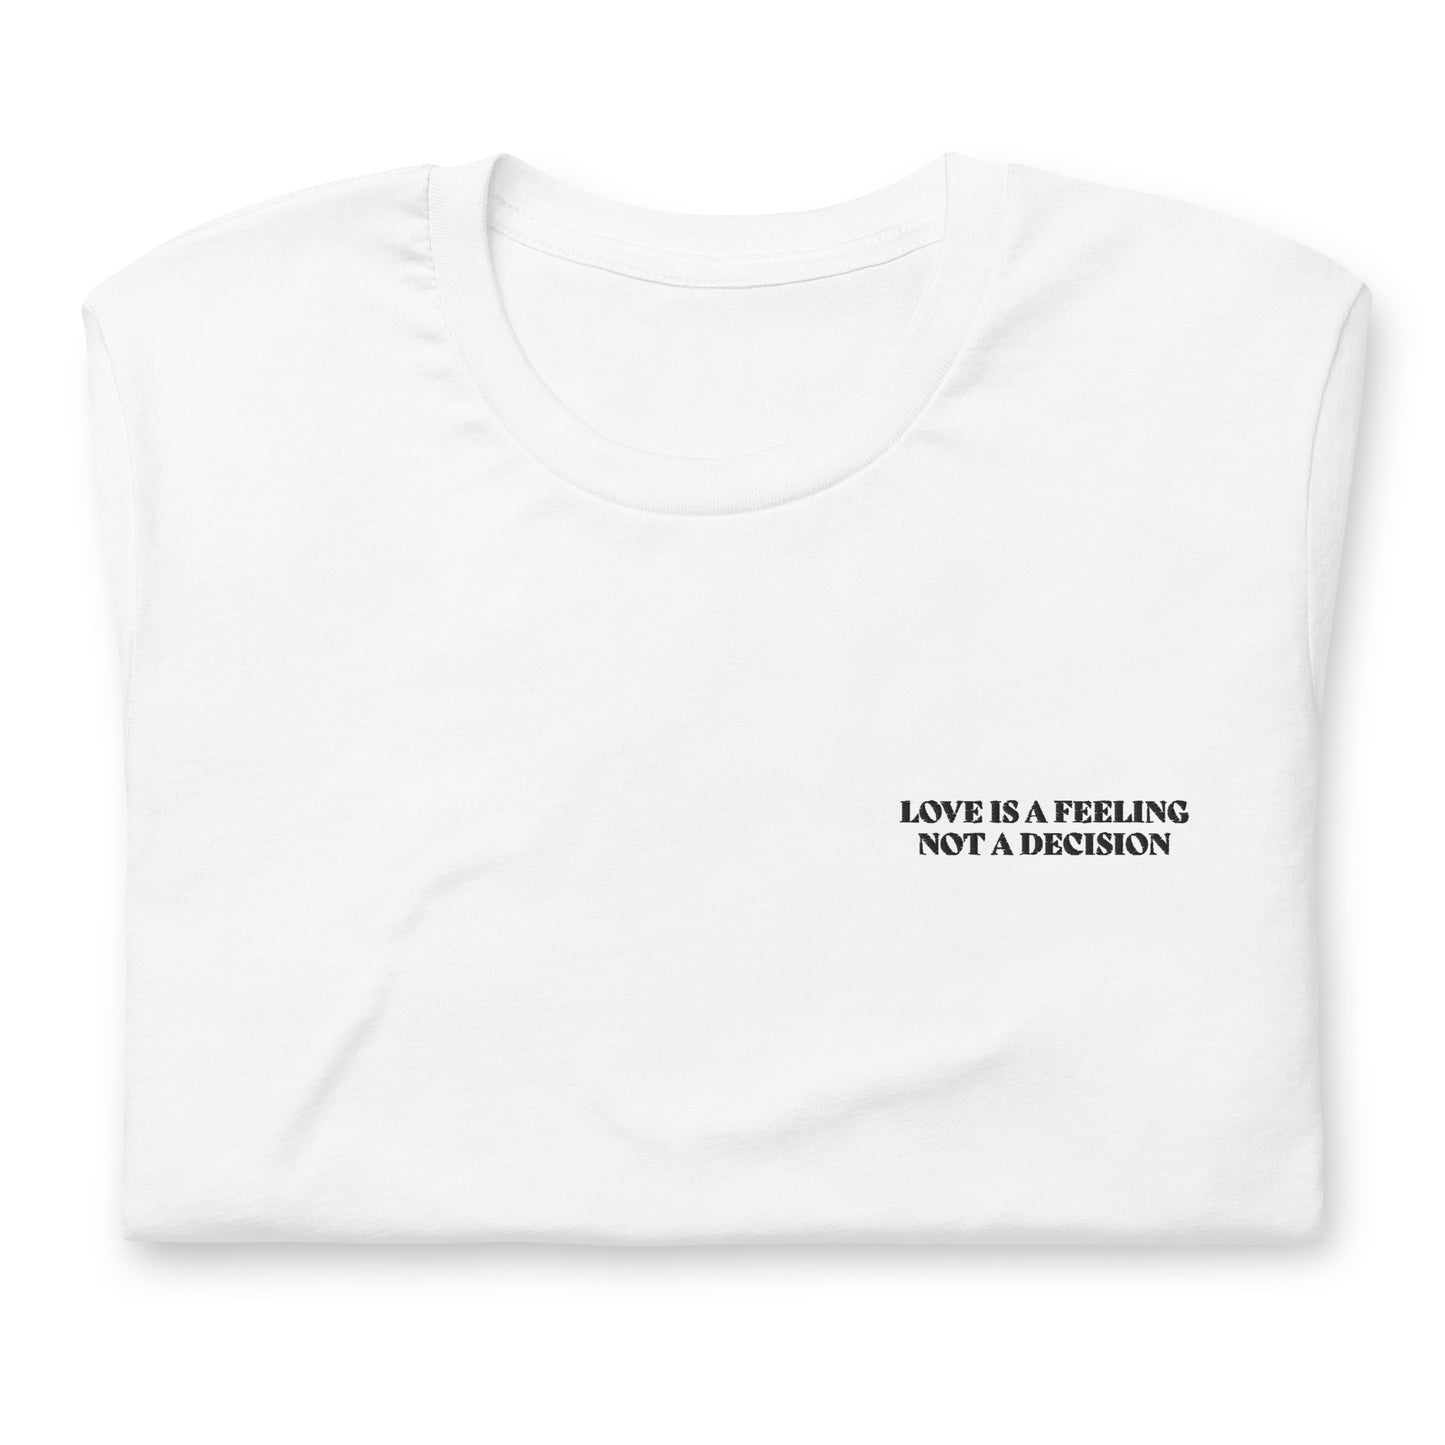 LOVE IS A FEELING NOT A DECISION - embroidered T-shirt